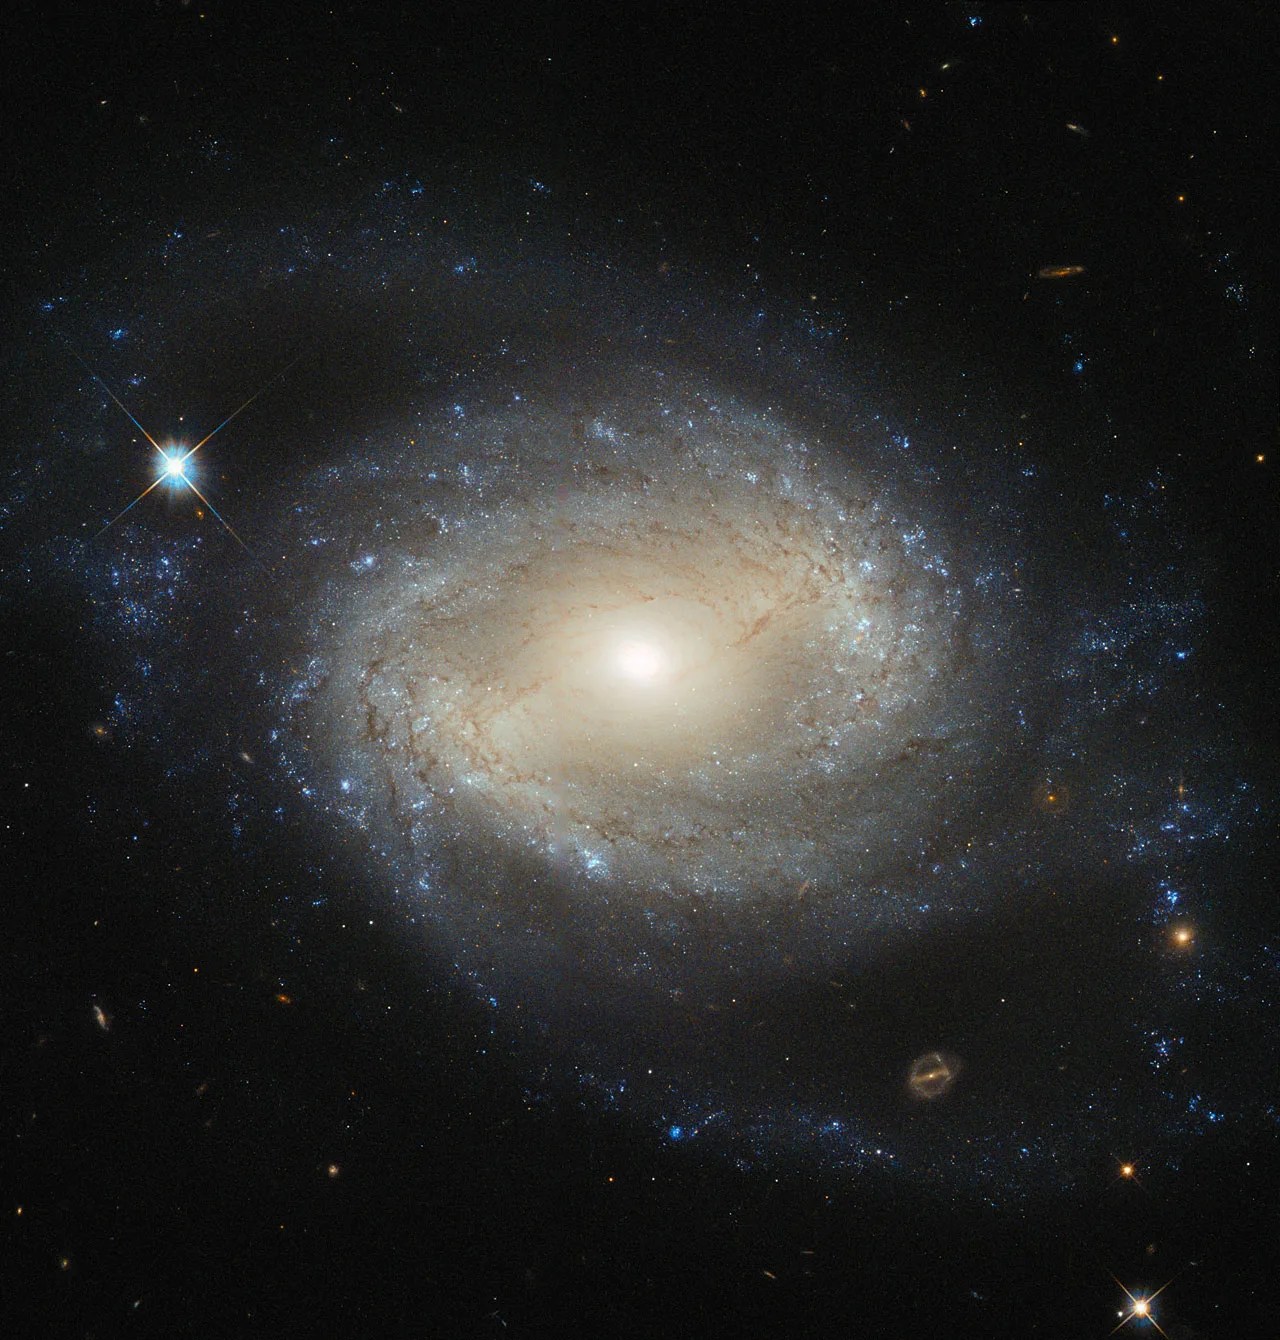 A beautiful example of a type of galaxy known as a barred spiral, with a "bar" of stars running through the center and spirals emerging from either end.